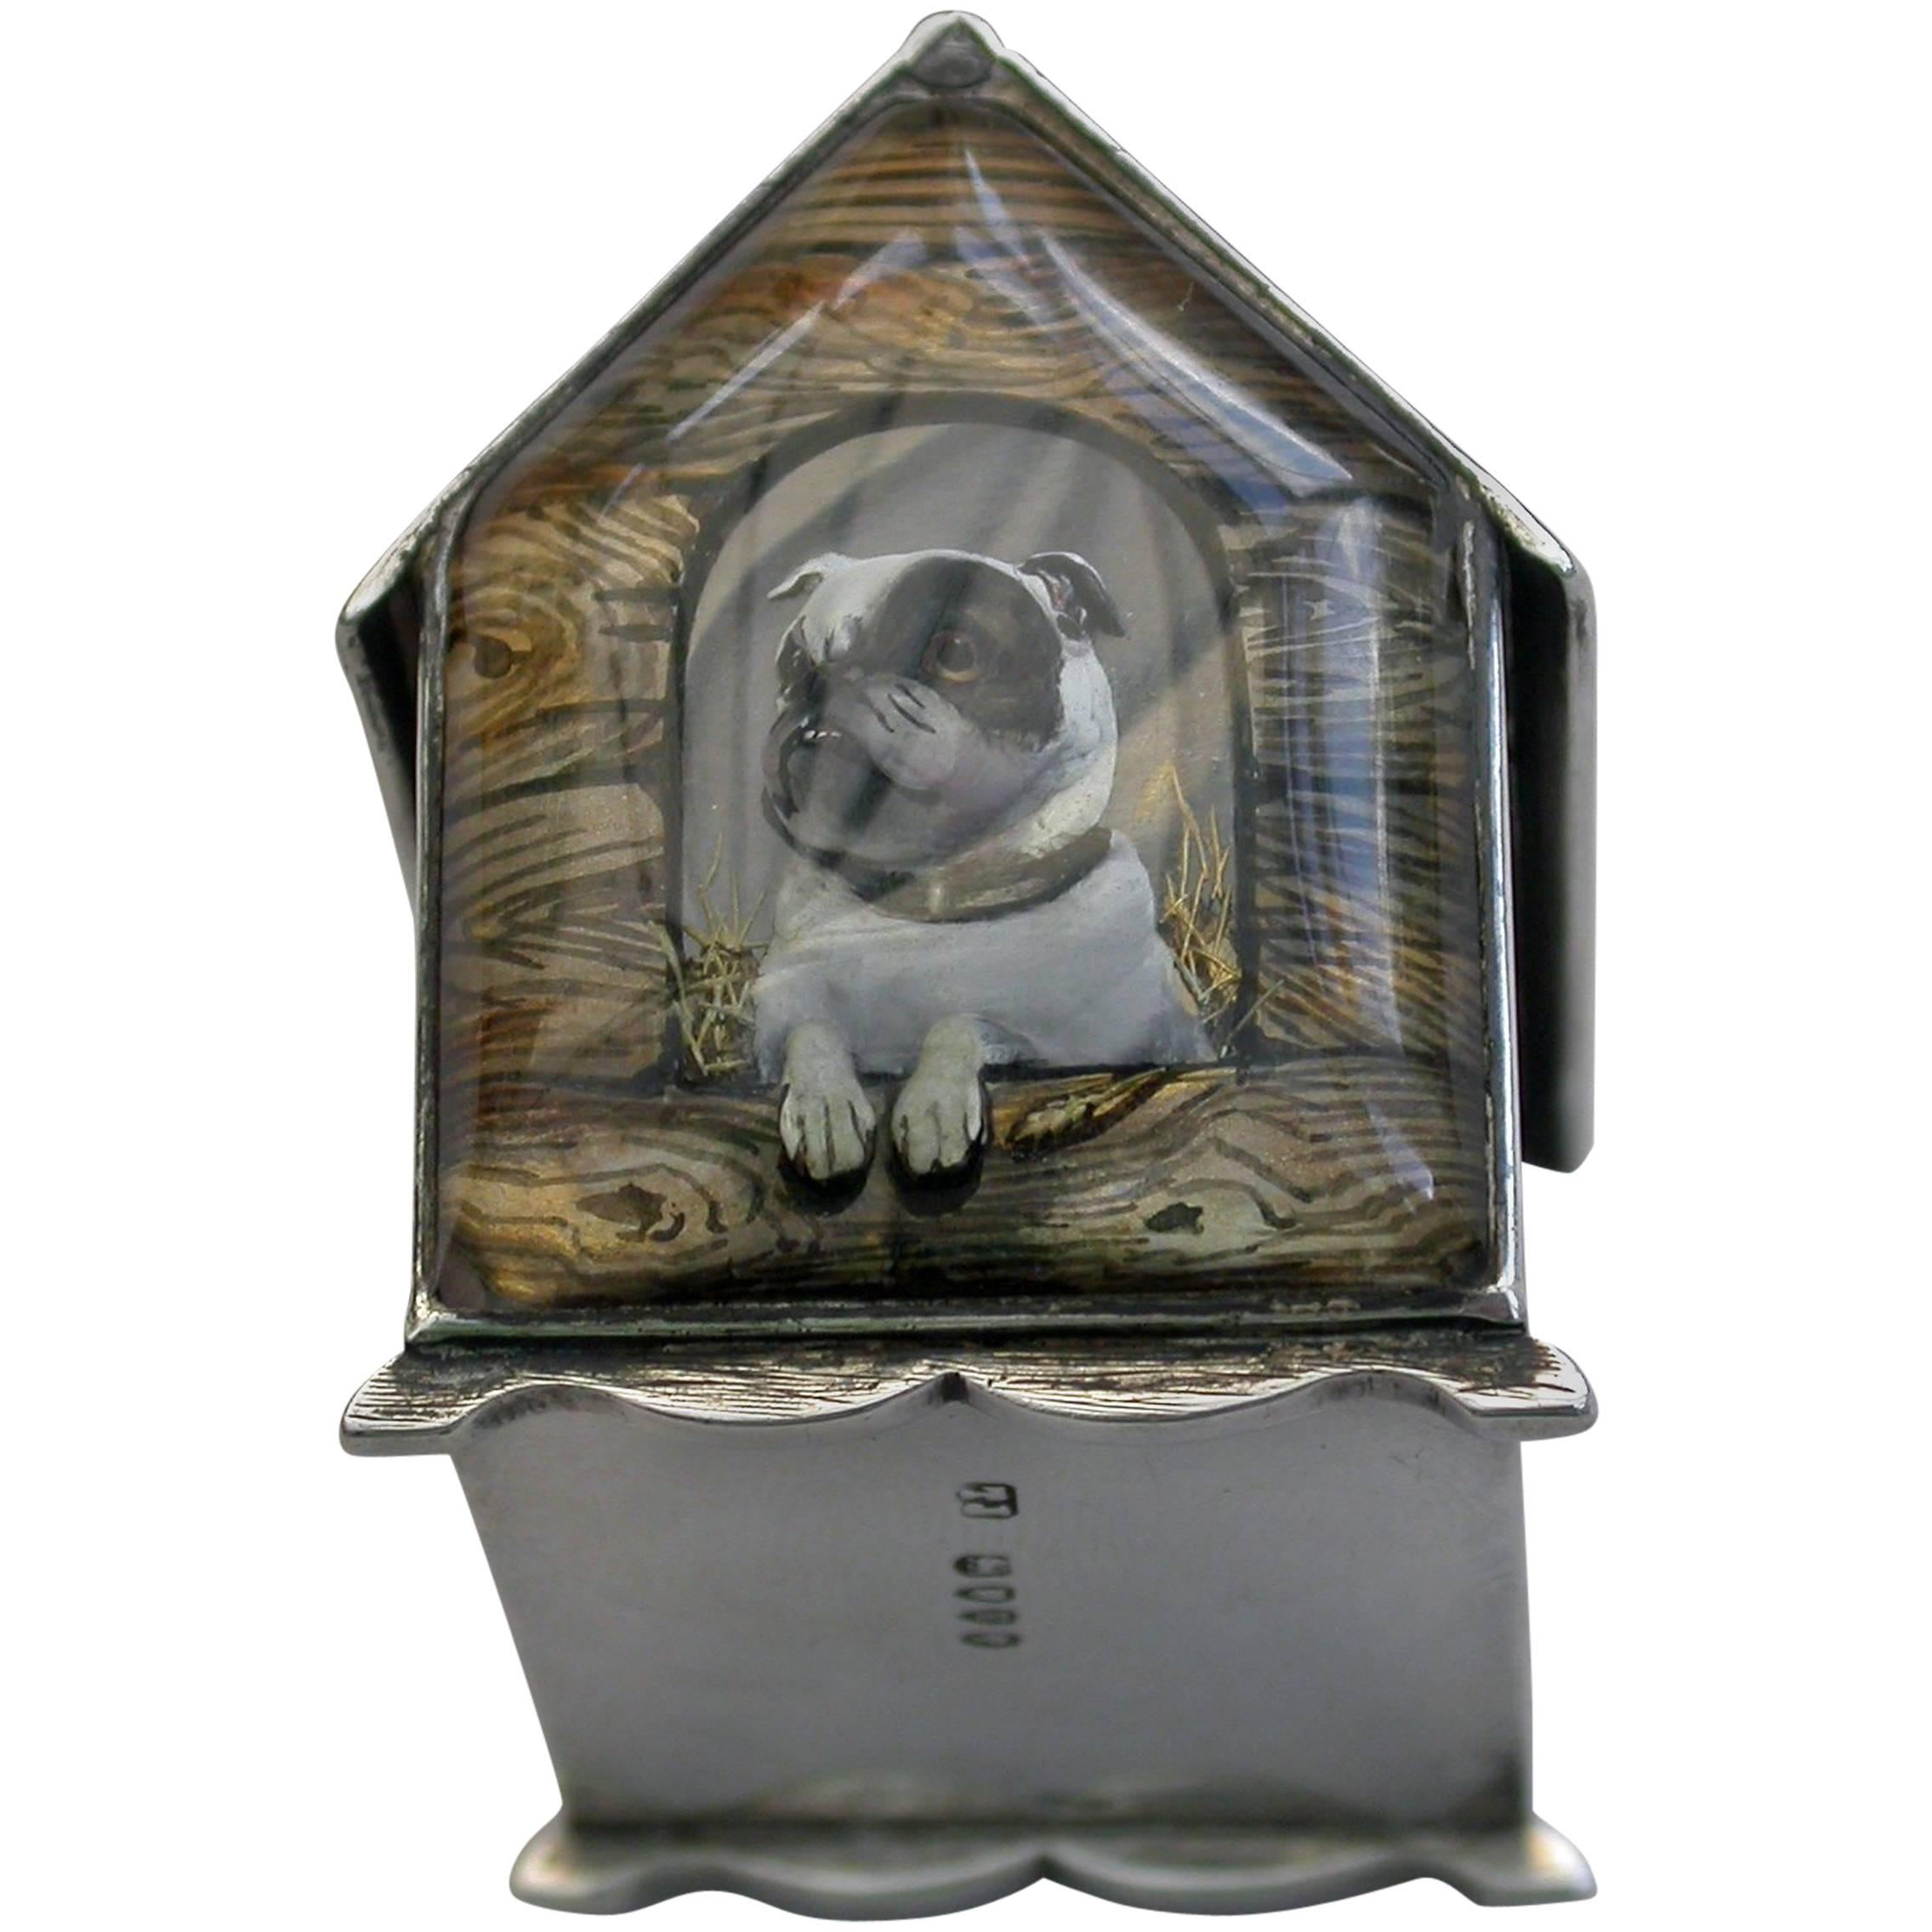 A very fine Victorian novelty silver and Essex rock crystal vesta case / box, modelled as a slatted wooden kennel, the front with an applied Essex rock crystal panel depicting a bull dog, the back drawer with silver gilt interior and striking panel